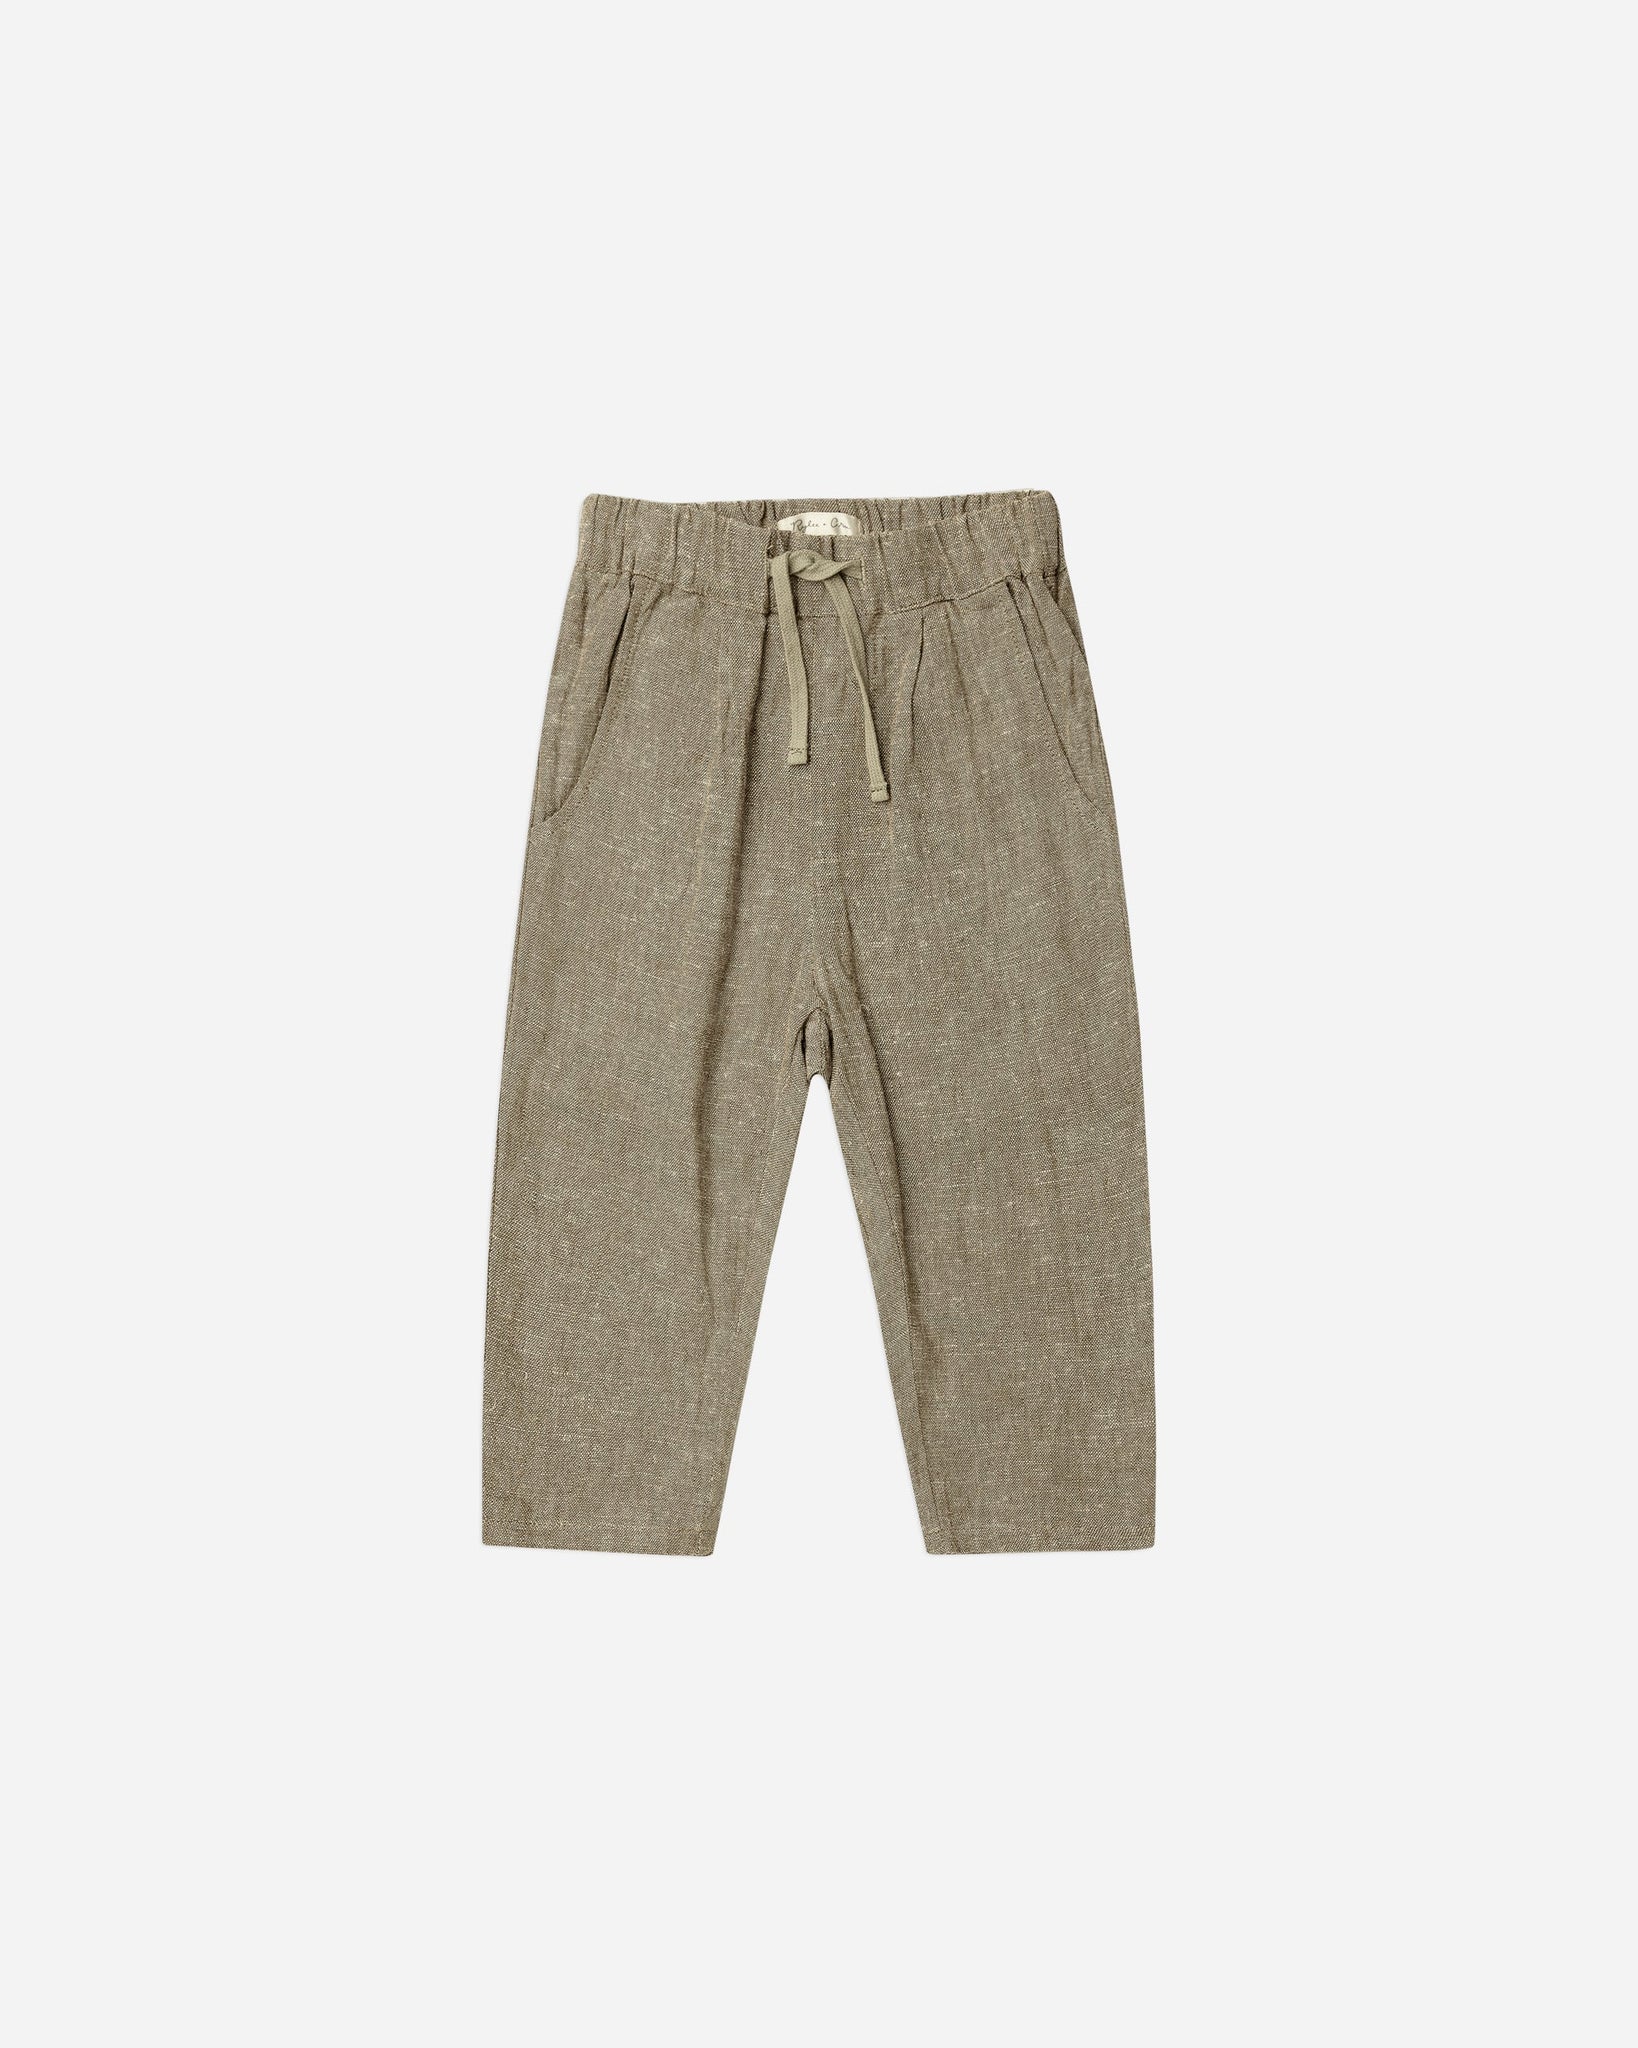 Rylee and Cru Ethan trouser ‘olive’